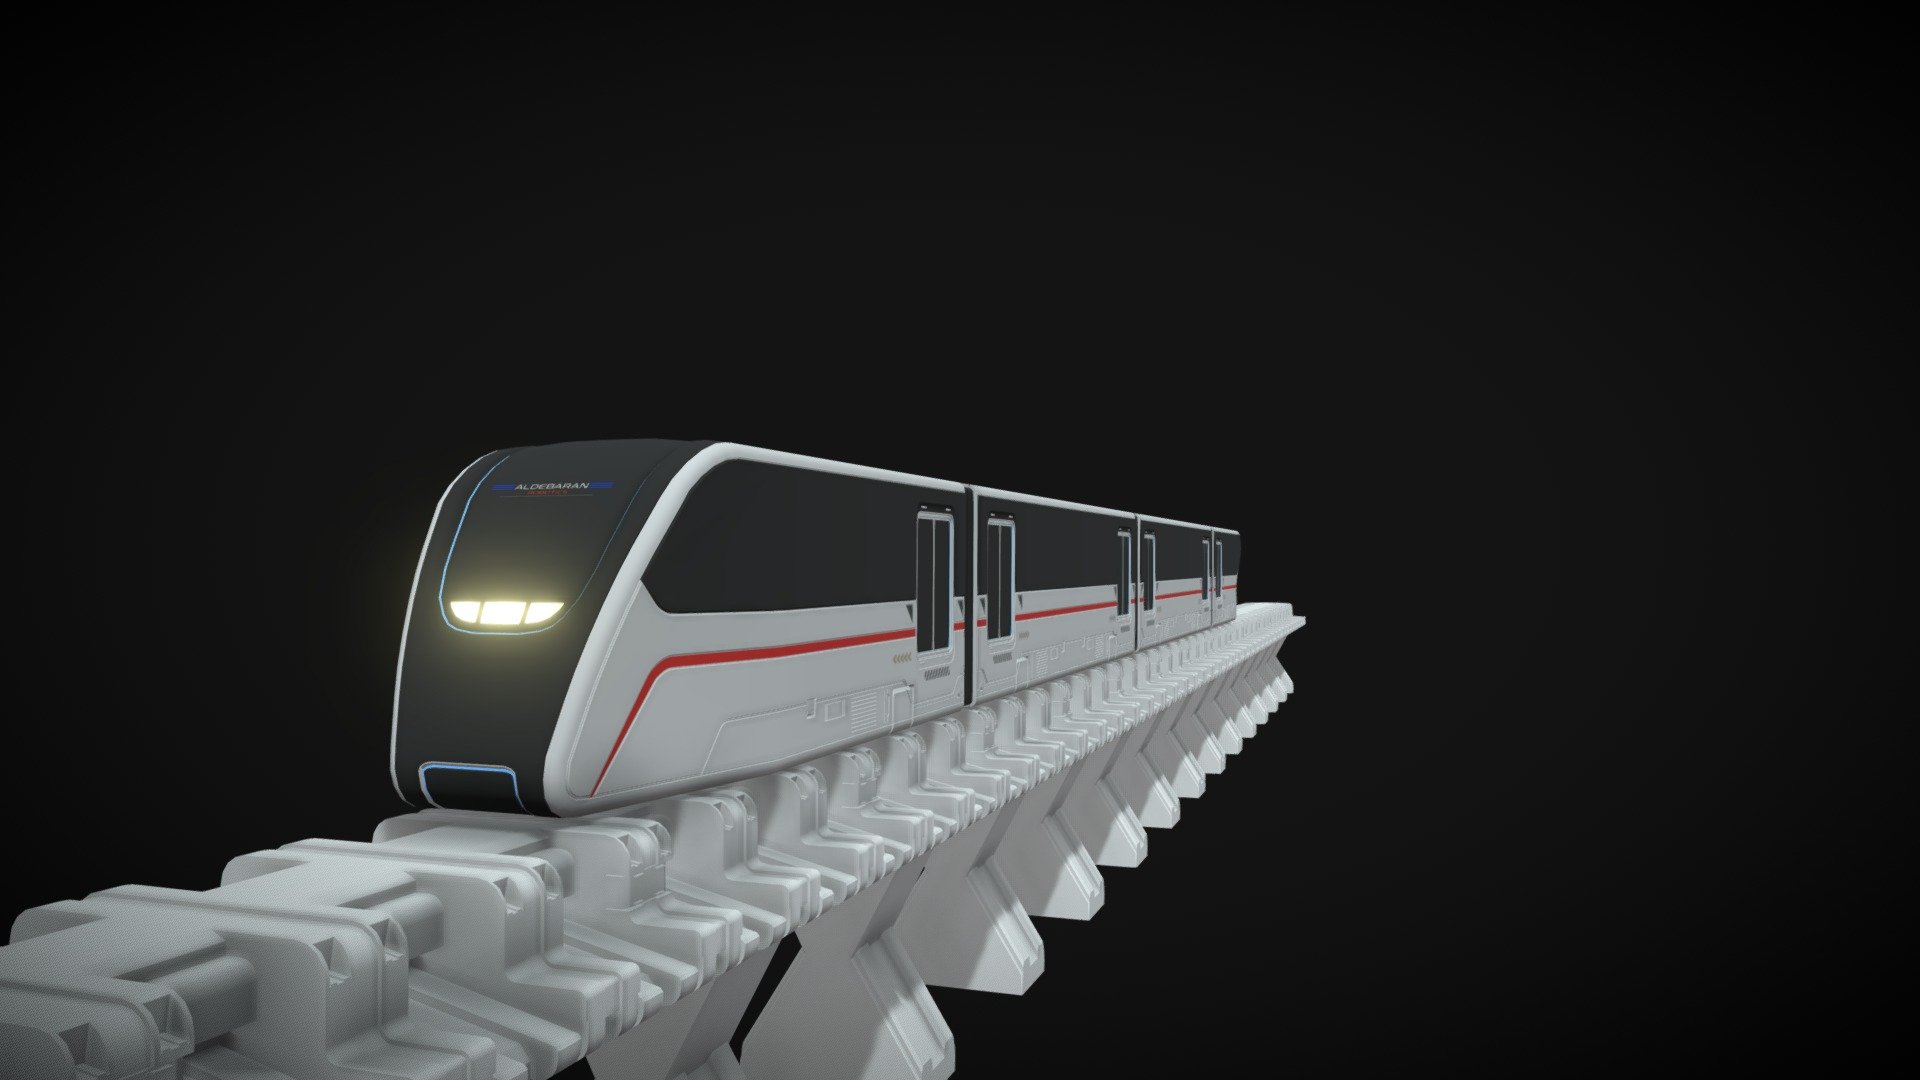 Train Sci Fi.

Sci Fi Train ready for Blender 3D 2.8, 2.91, 2.92, 2.93, 3.0+ 

PBR Materials. 
Camera Setup, 
Lights, 
Materials, 
Rendering + Cycles Boost in Blend File 3d model